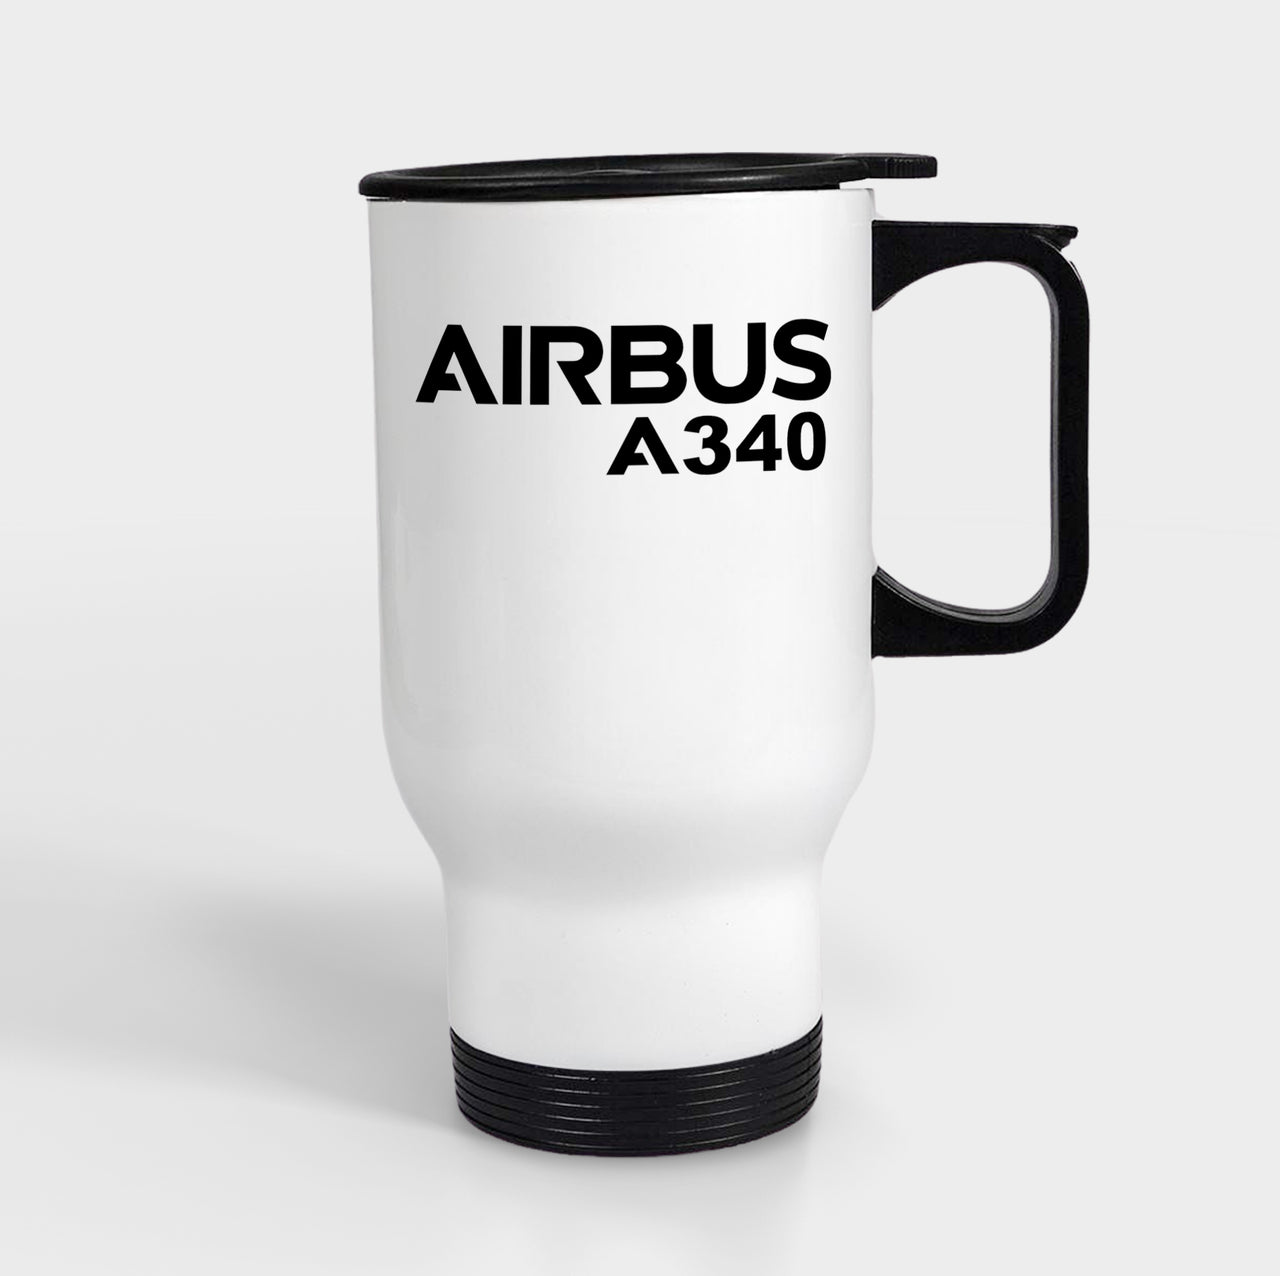 Airbus A340 & Text Designed Travel Mugs (With Holder)